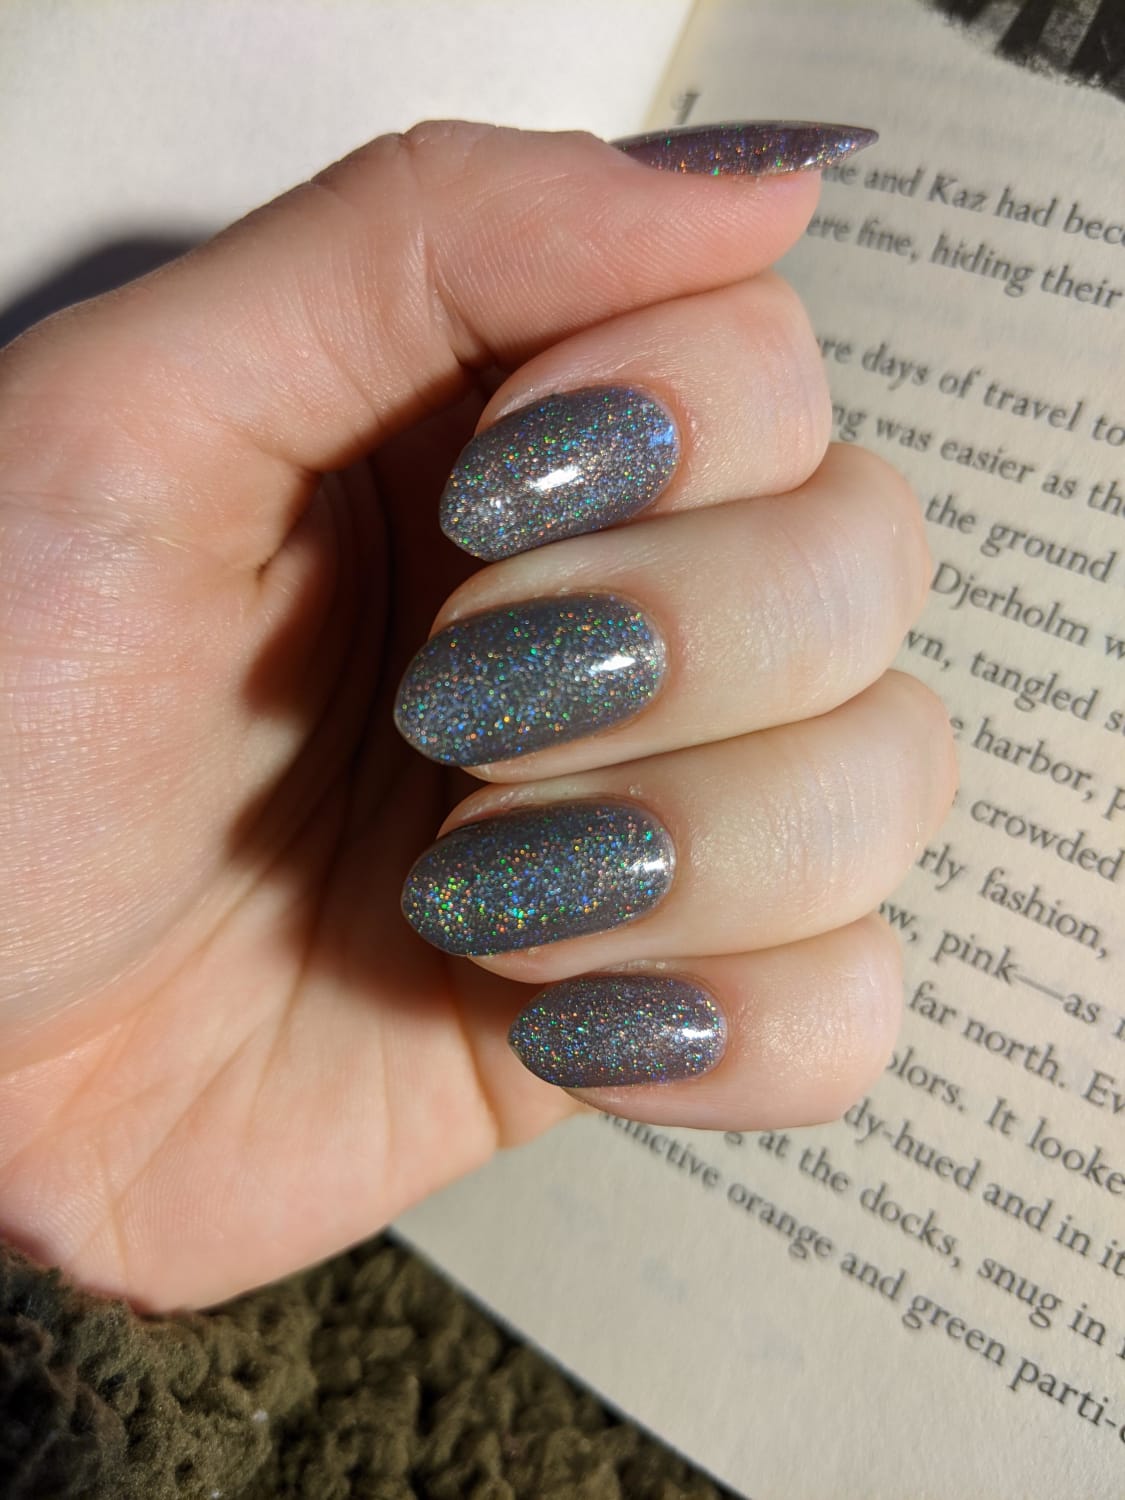 Central Station by ILNP is a whole mood